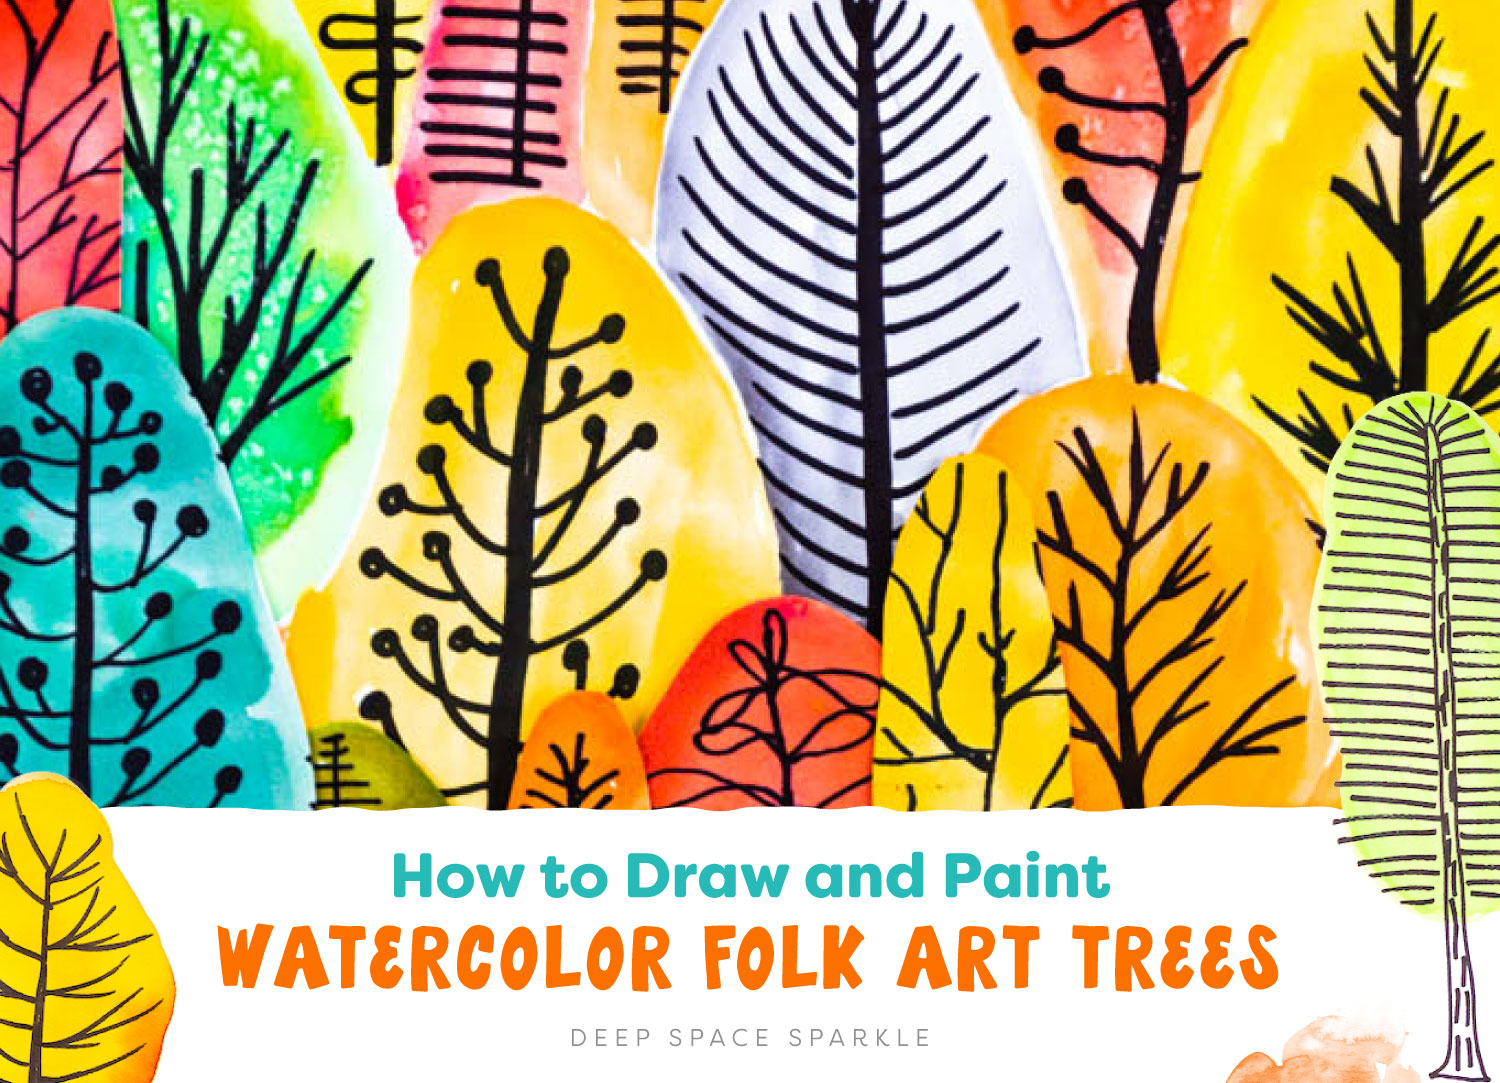 How to Draw and Paint Watercolor Folk Art Trees